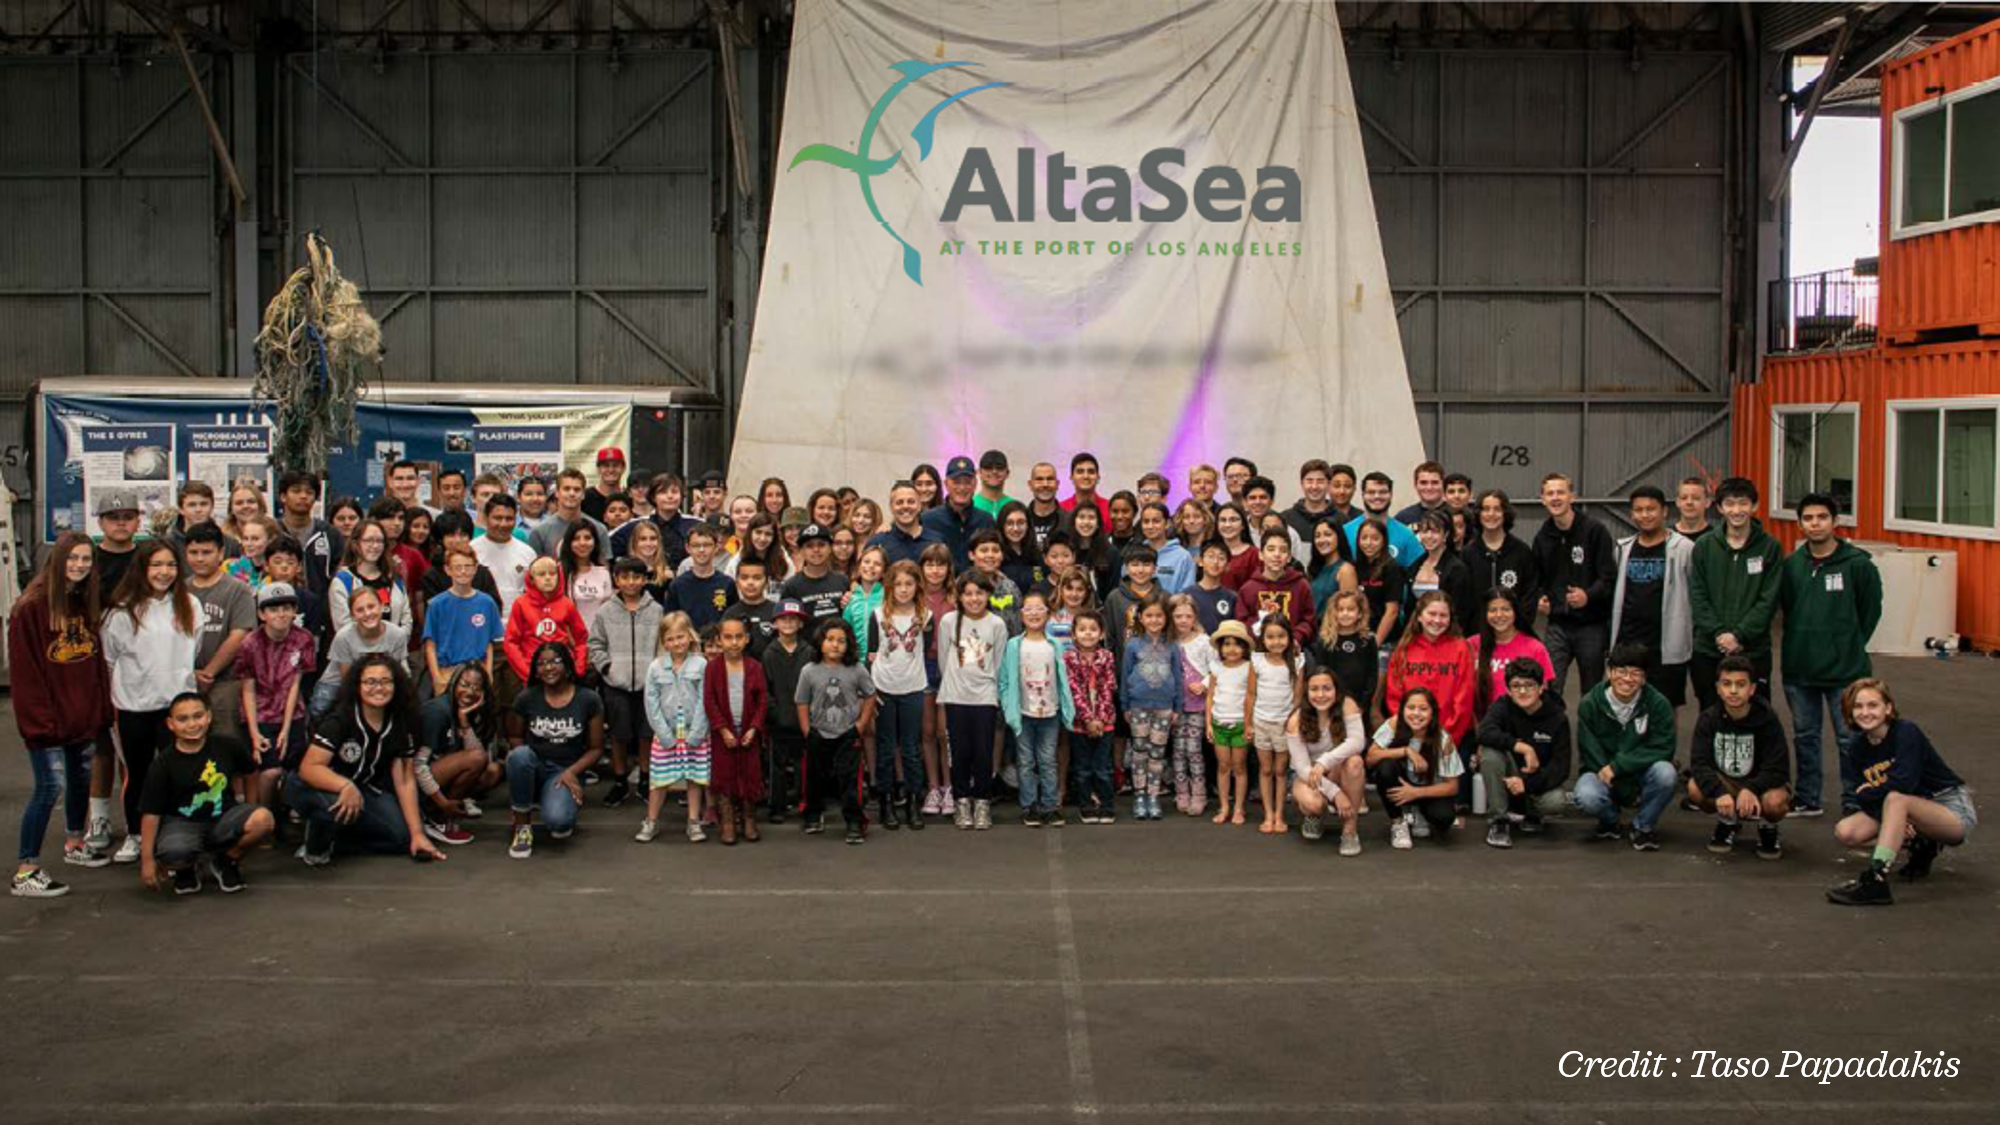 A large group of people photographed from far away in front of an AltaSea banner.